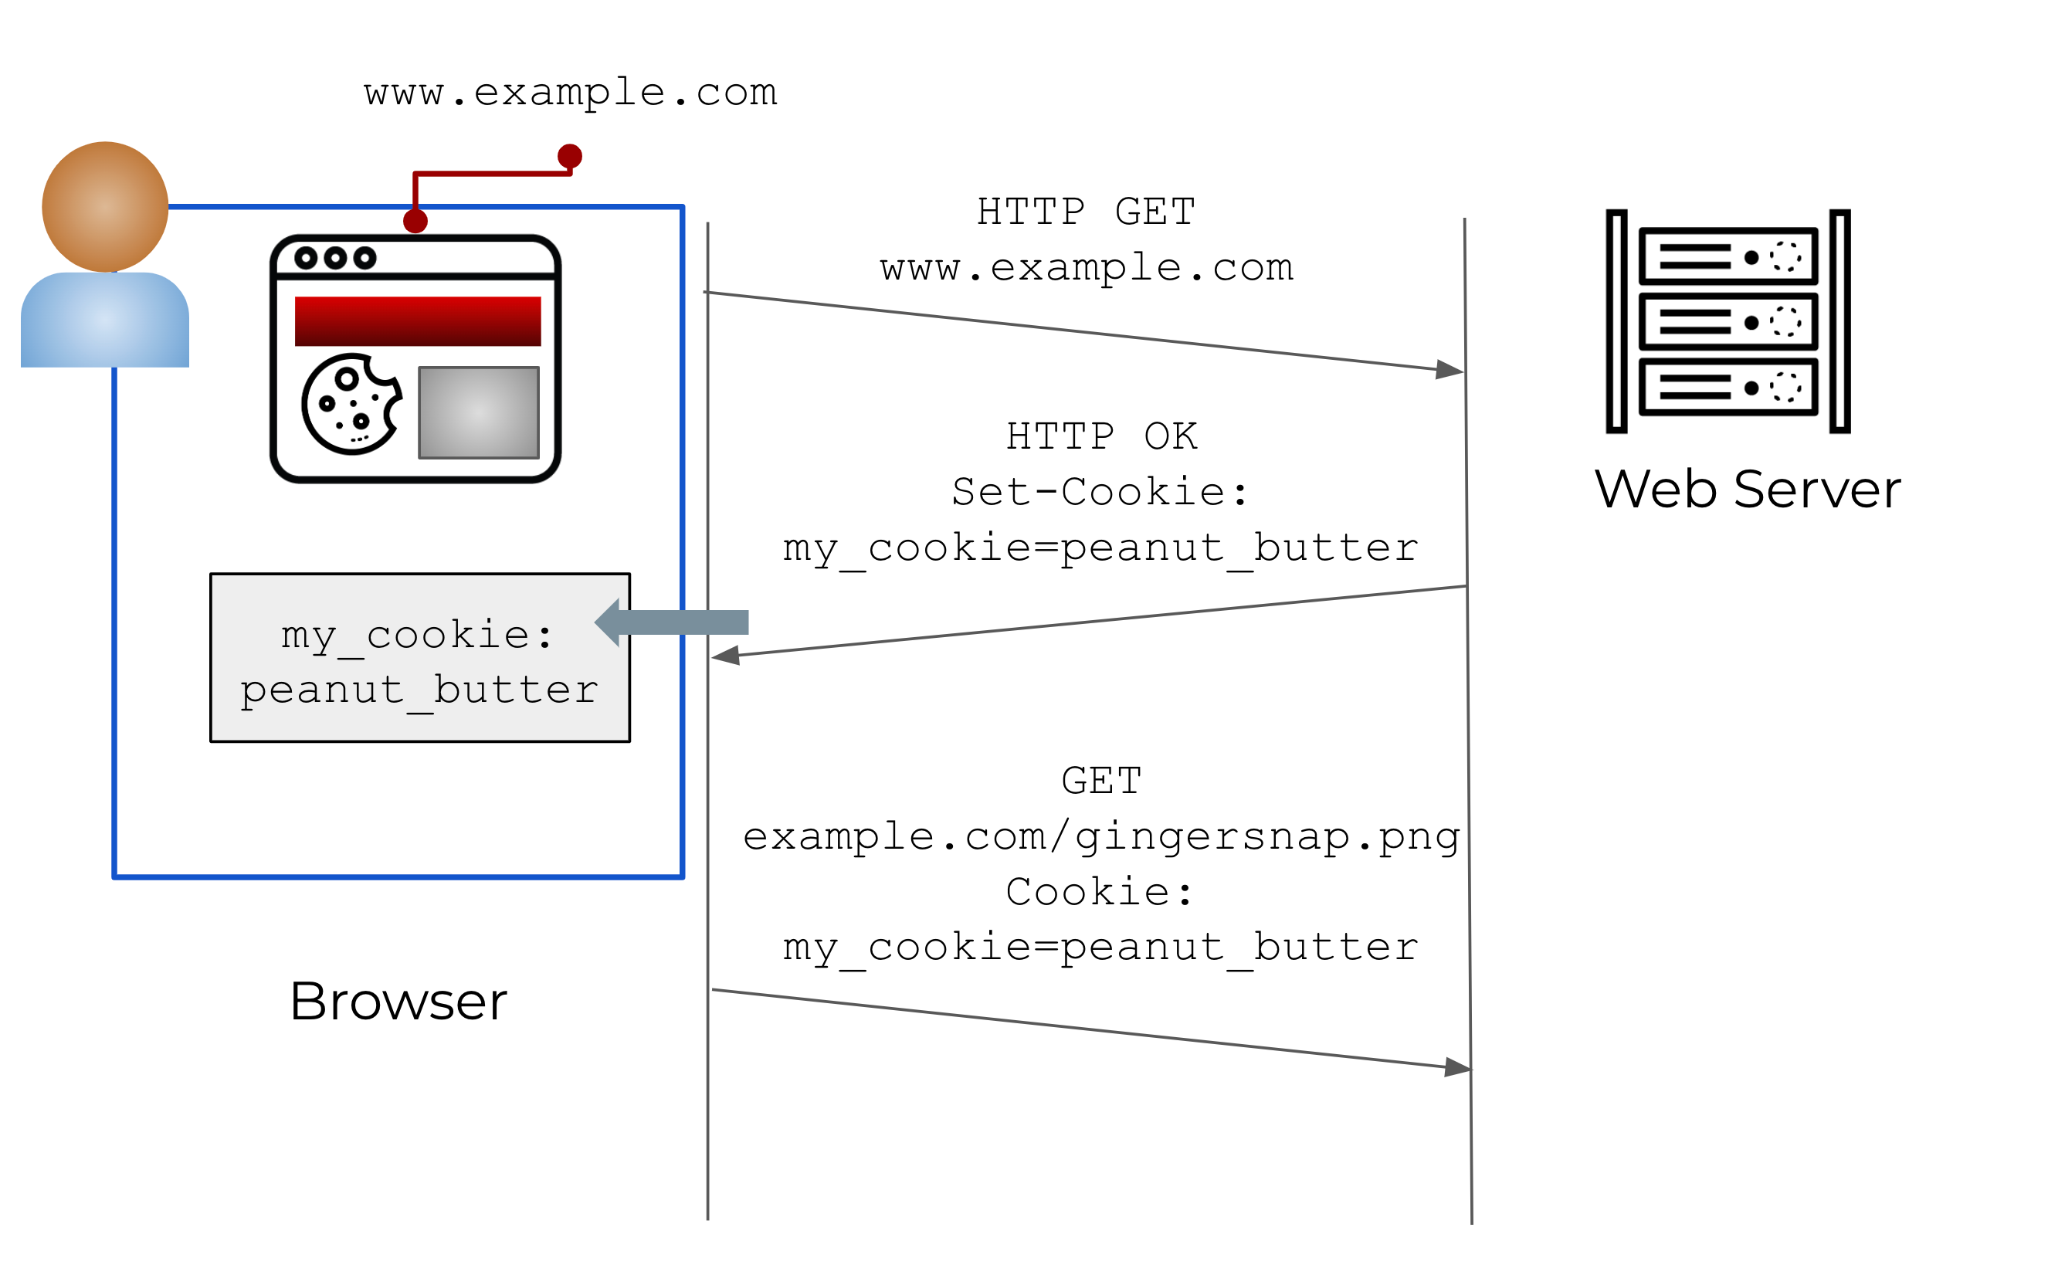 The user pictured browses to www[.]example[.]com. An HTTP Get request is sent to the site's webservers, and the owner has configured them to send users cookies in response. In this example, the cookie "my_cookies" is set to the value "peanut_butter." When the user in this example browses to other pages on this domain, the messages that she sends will include the cookie "peanut_butter," allowing her movements on the site to be tracked.